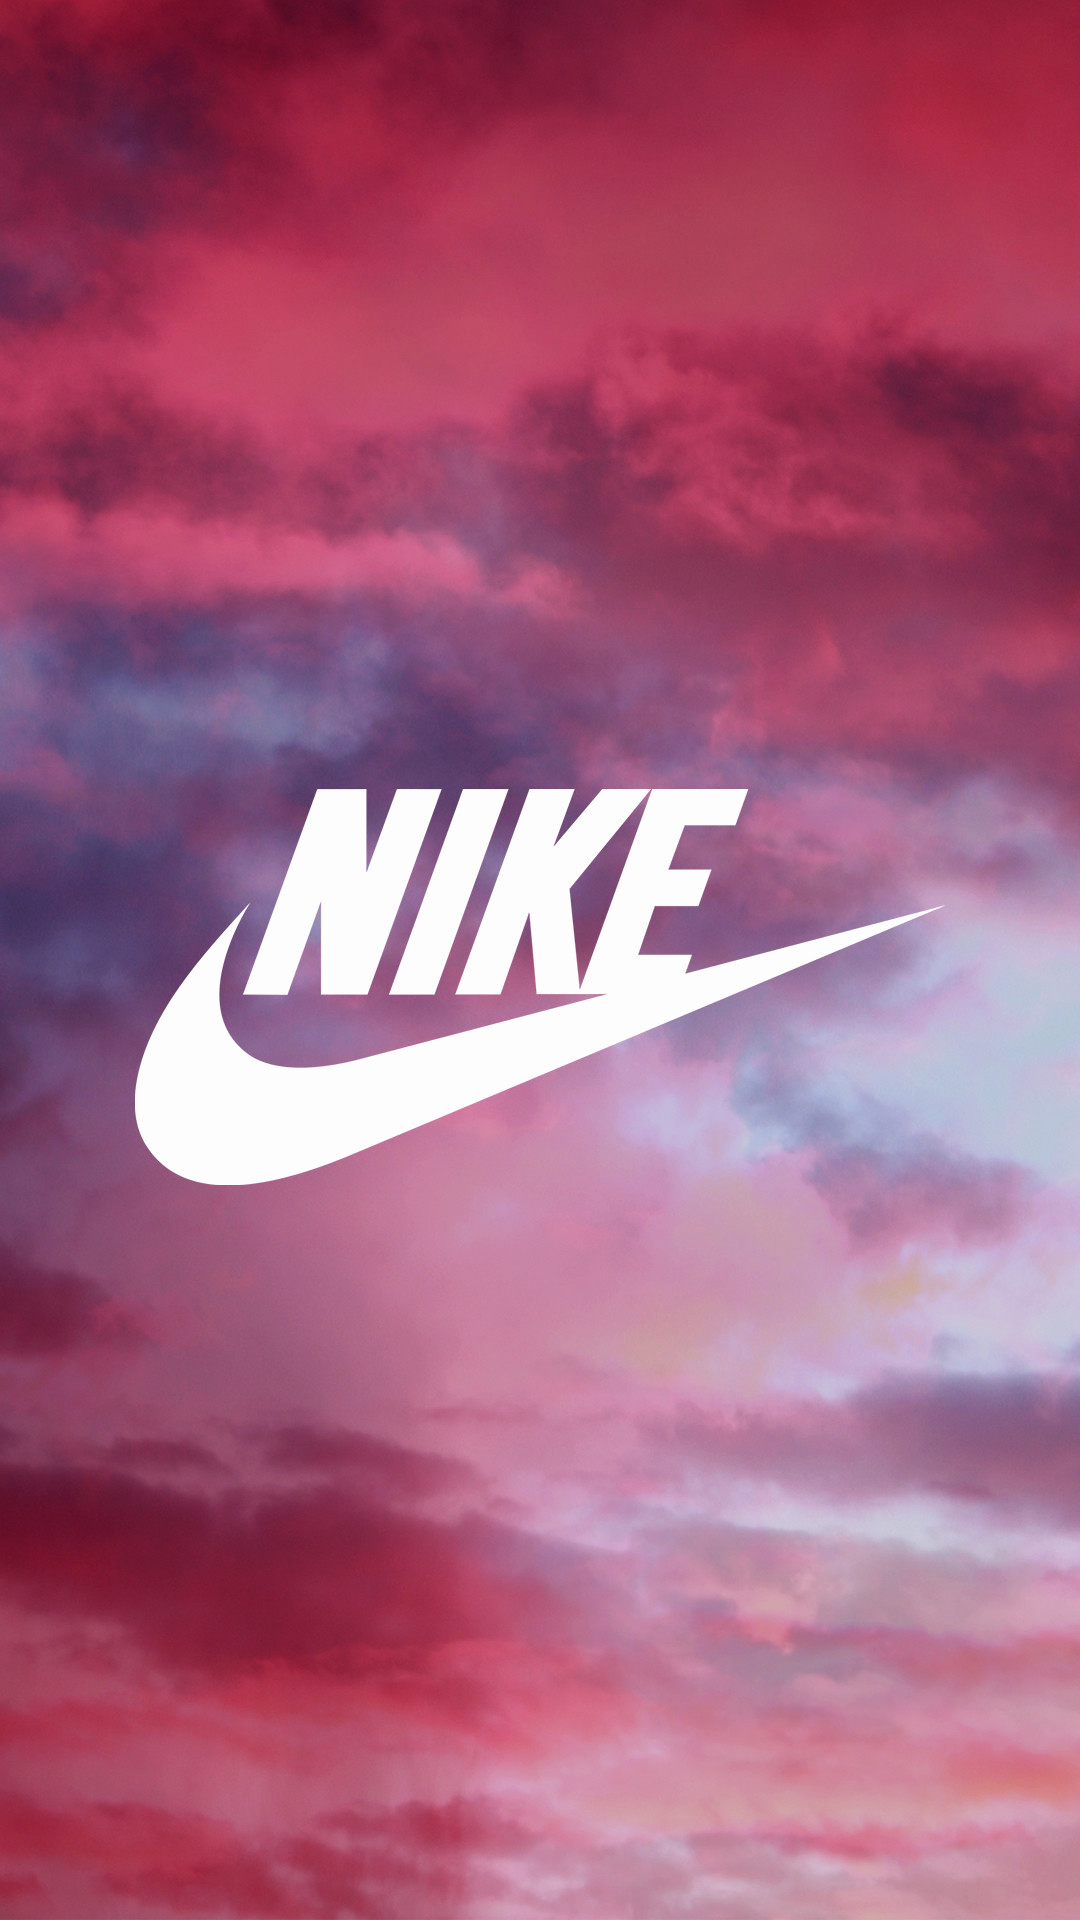 73 Pink Nike Wallpapers On Wallpaperplay Data Src Nike Wallpaper For Iphone 1080x1920 Wallpaper Teahub Io Looking for the best leopard girly soccer backgrounds? wallpaperplay data src nike wallpaper